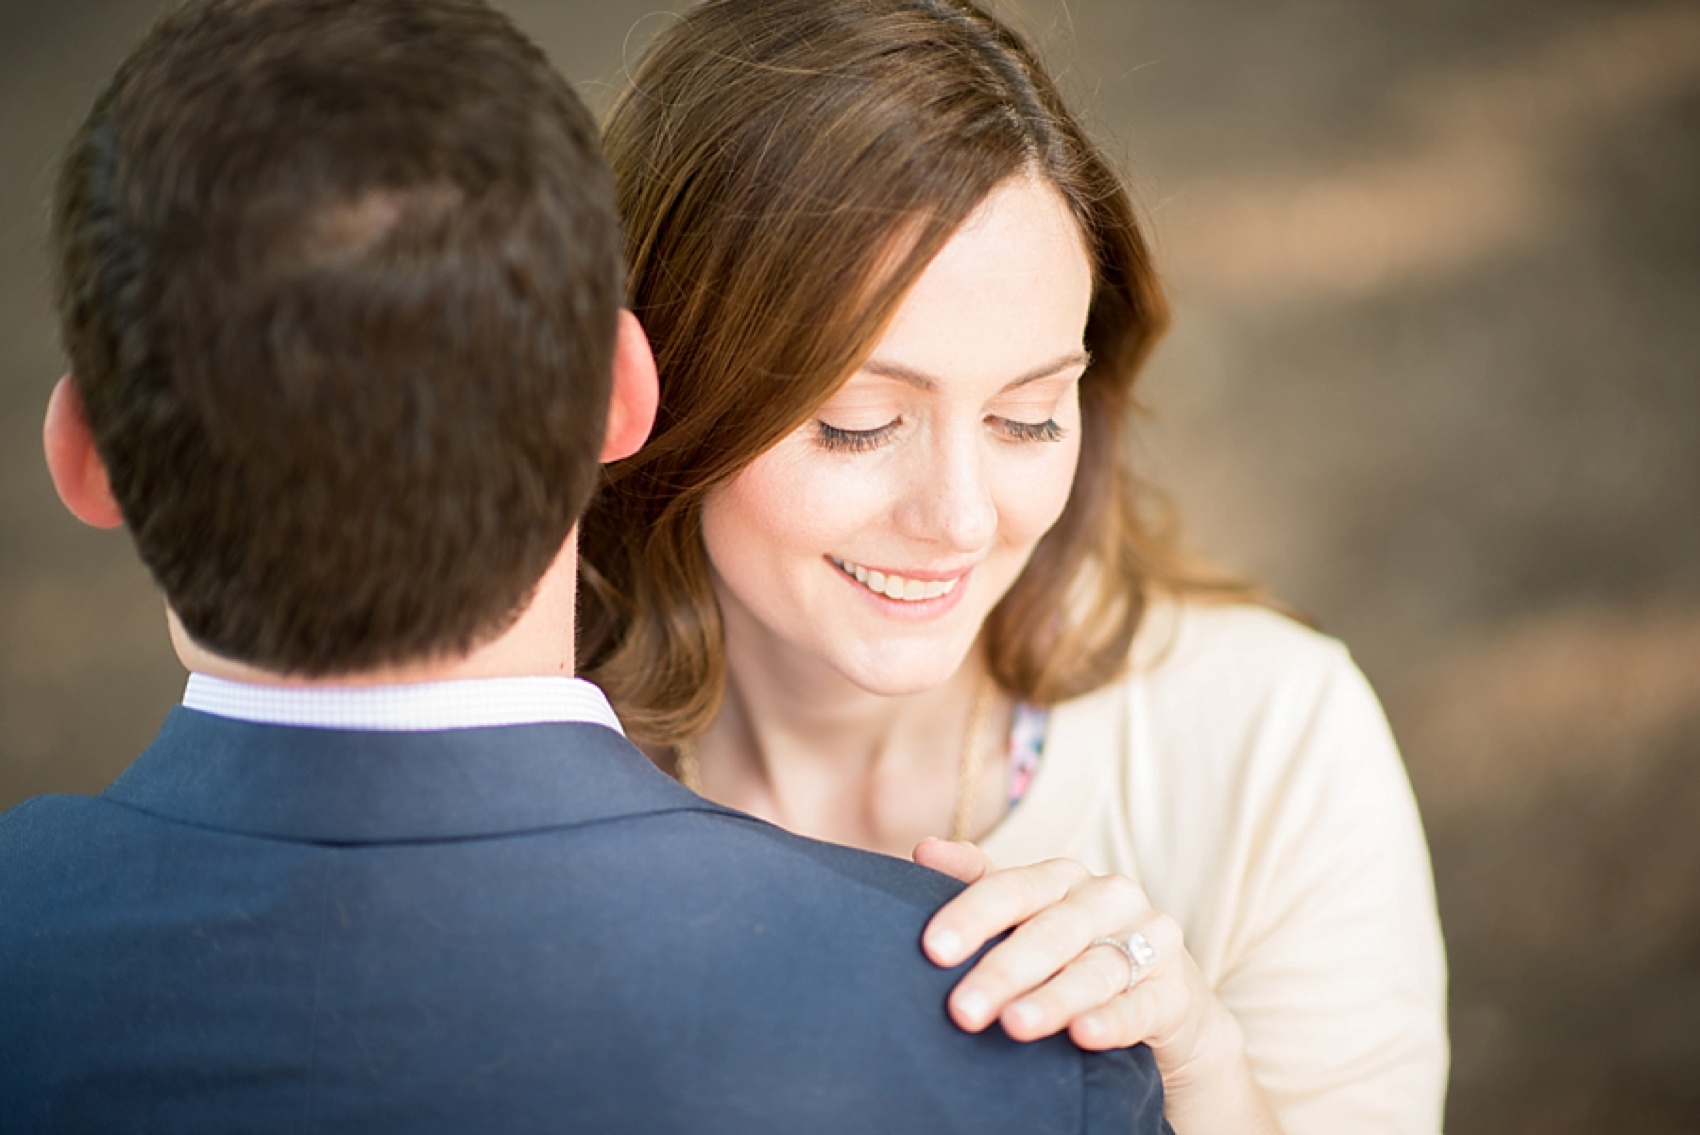 Central Park Engagement session by NYC wedding photographer Mikkel Paige Photography.